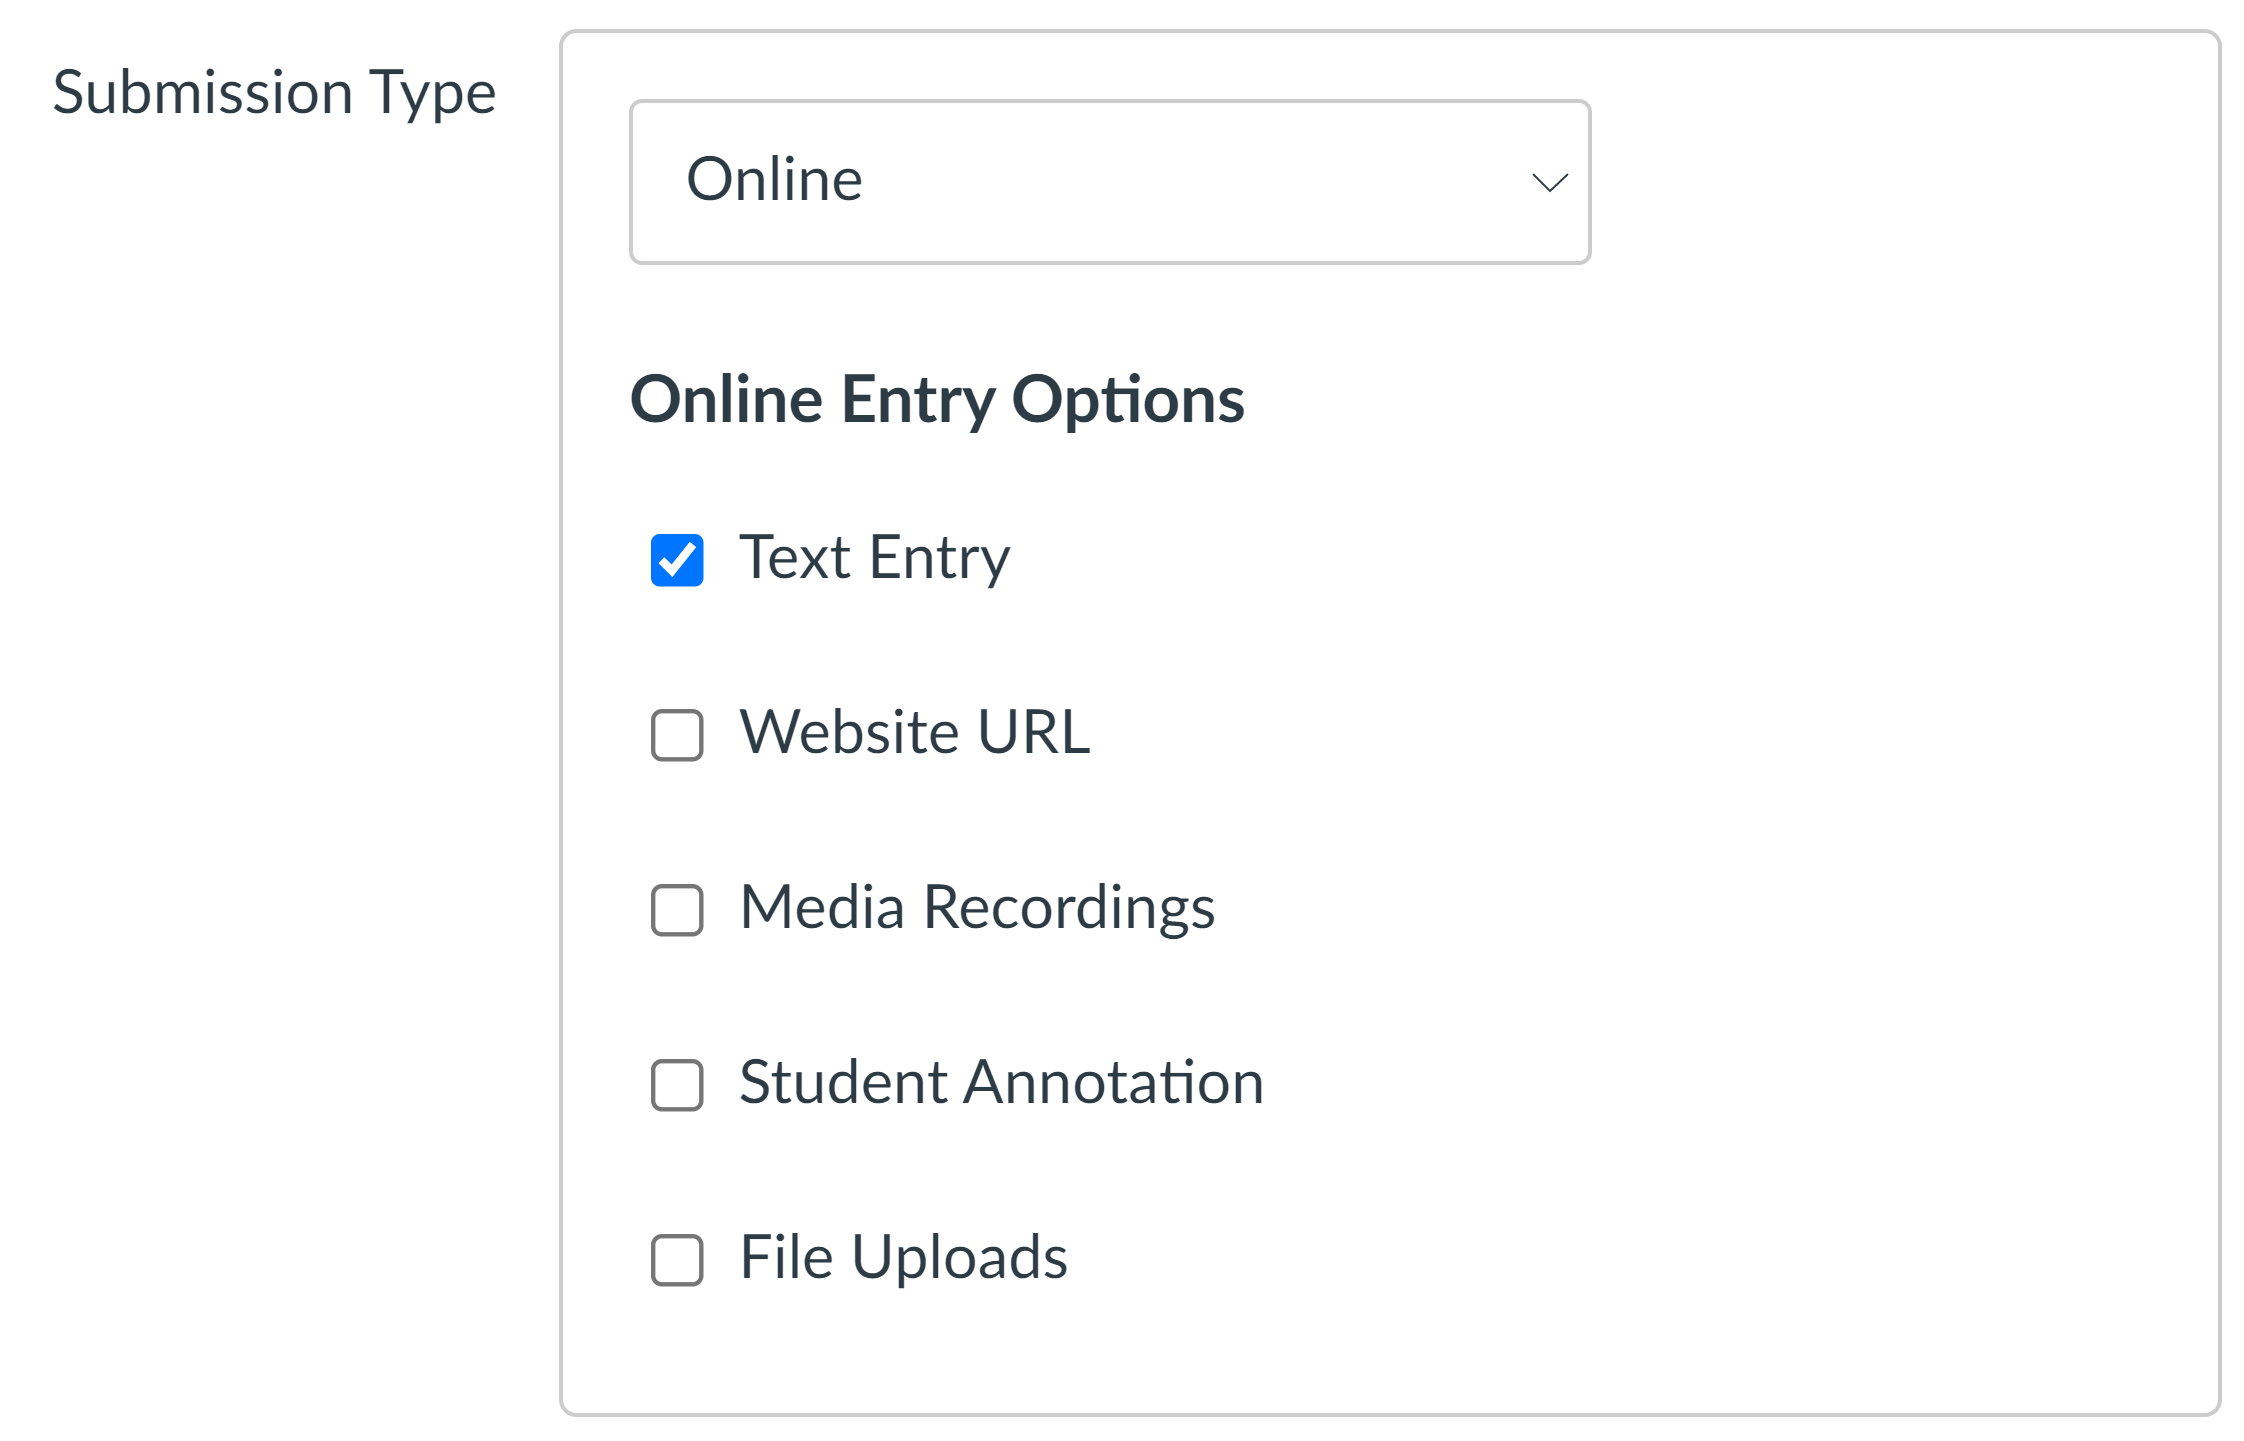 Submission type featrues Online and Text Entry as selected.